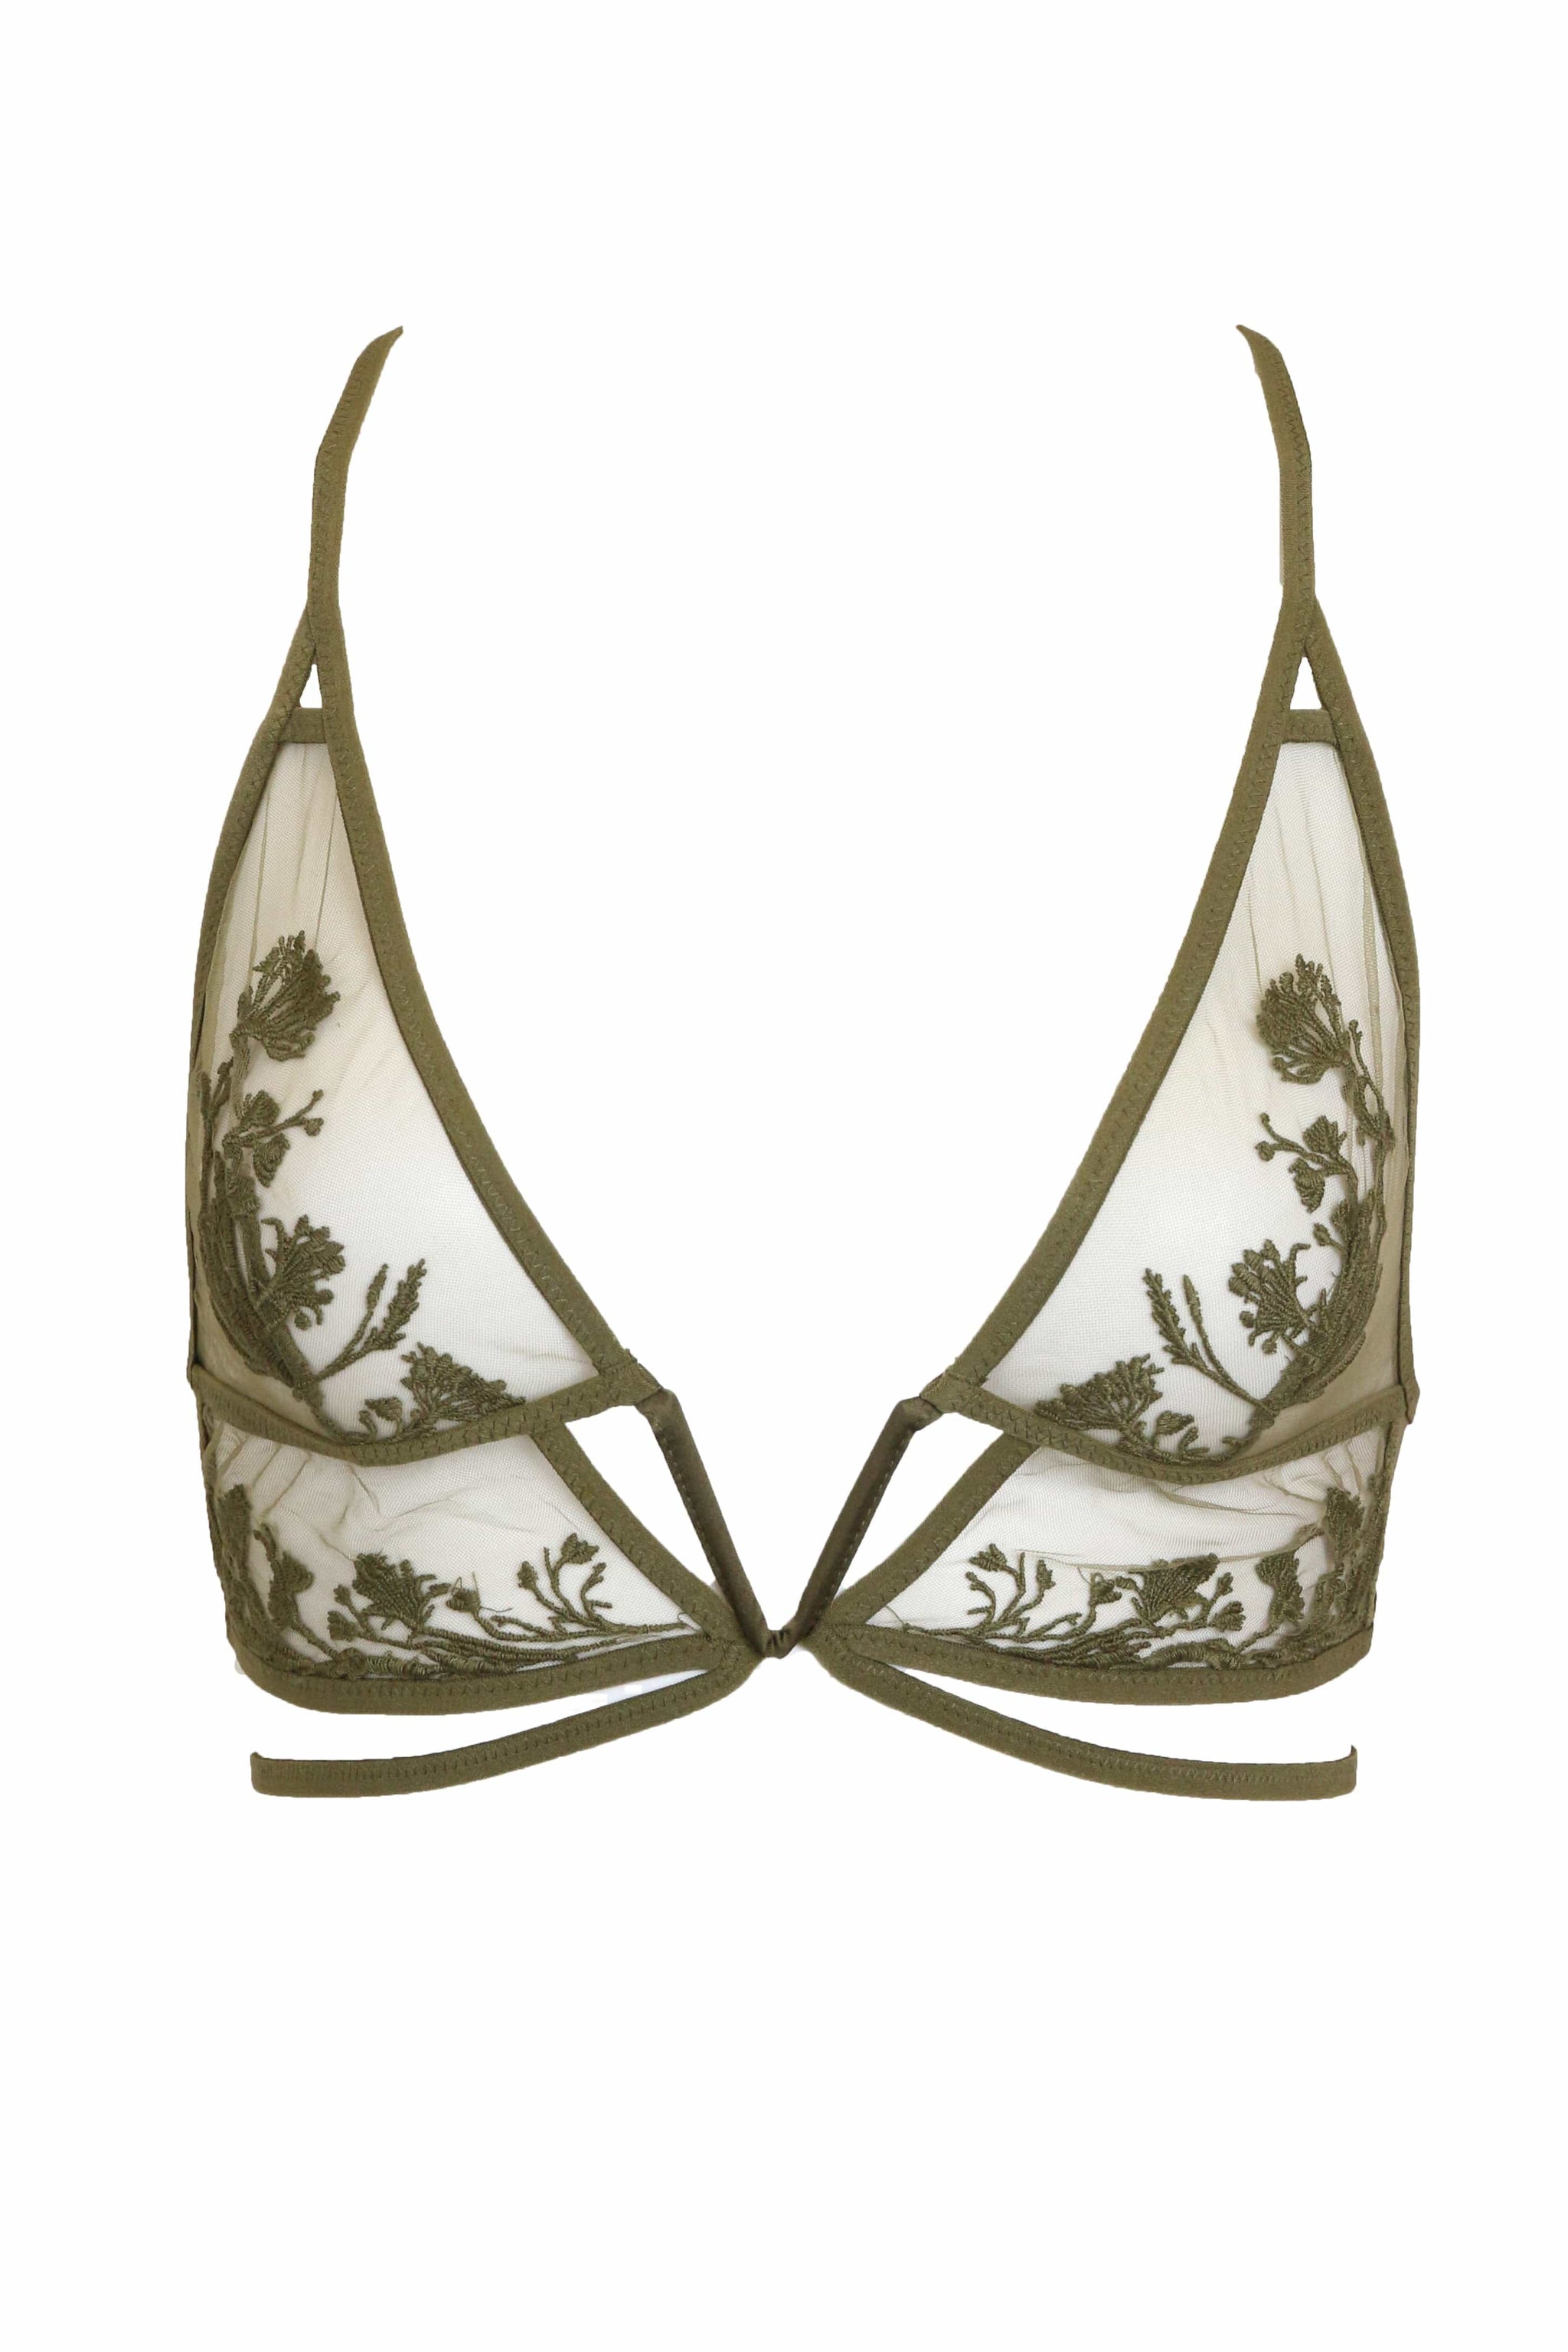 Mullberry Keyhole Bralette- Olive - Chérie Amour